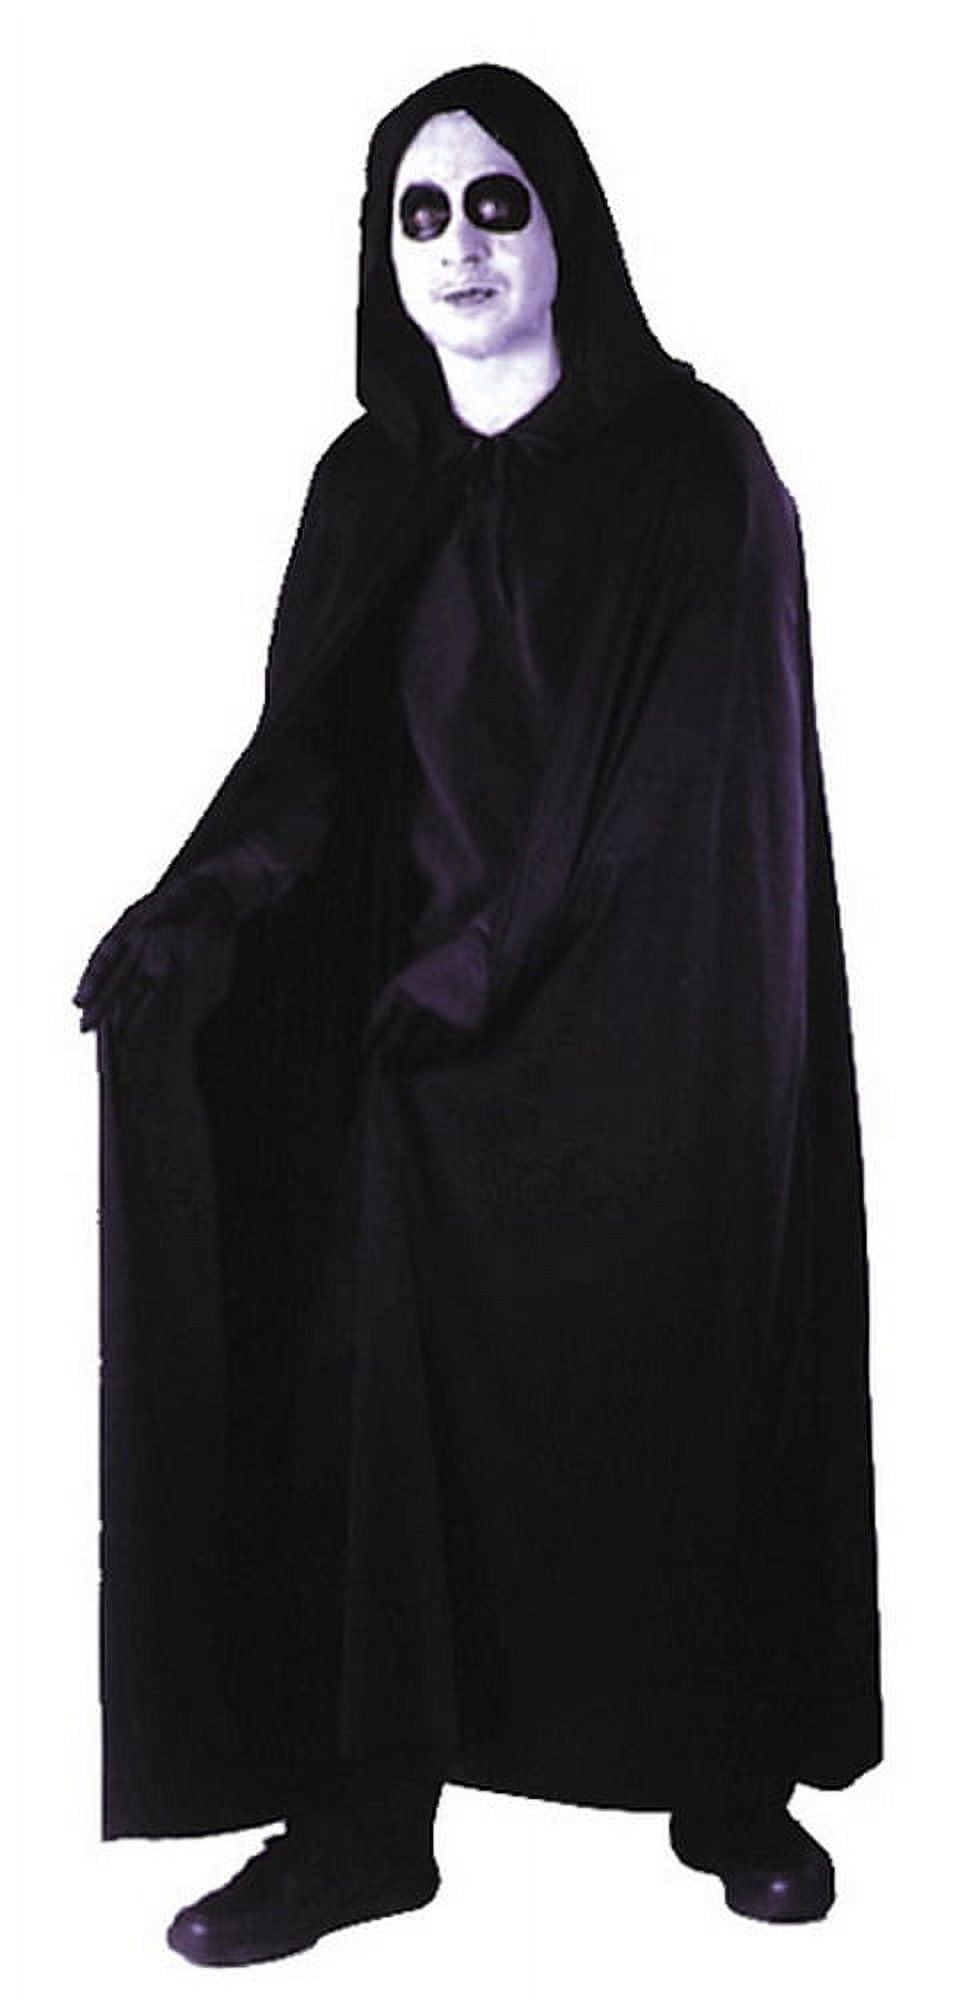 CLISPEED Halloween Cape Vampire Cosplay Costume for Adults Reversible  Hooded Cloak with Masquerade Mask